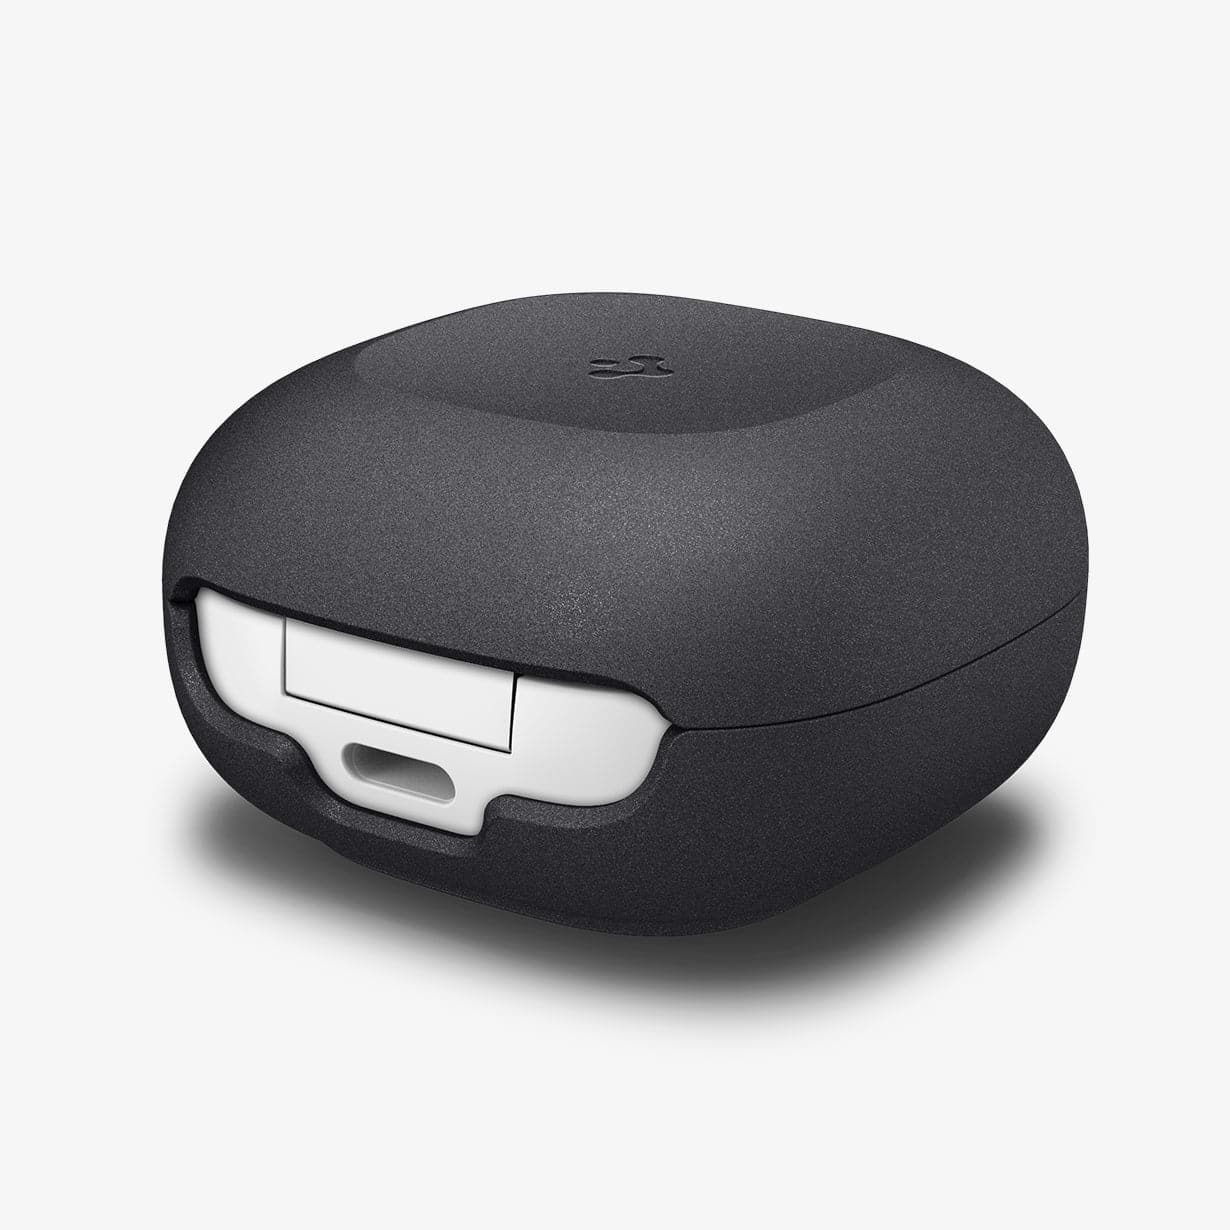 ACS03166 - Galaxy Buds 2 Pro / 2 / Pro / Live Case GeoFit in graphite gray showing the back, side and partial top